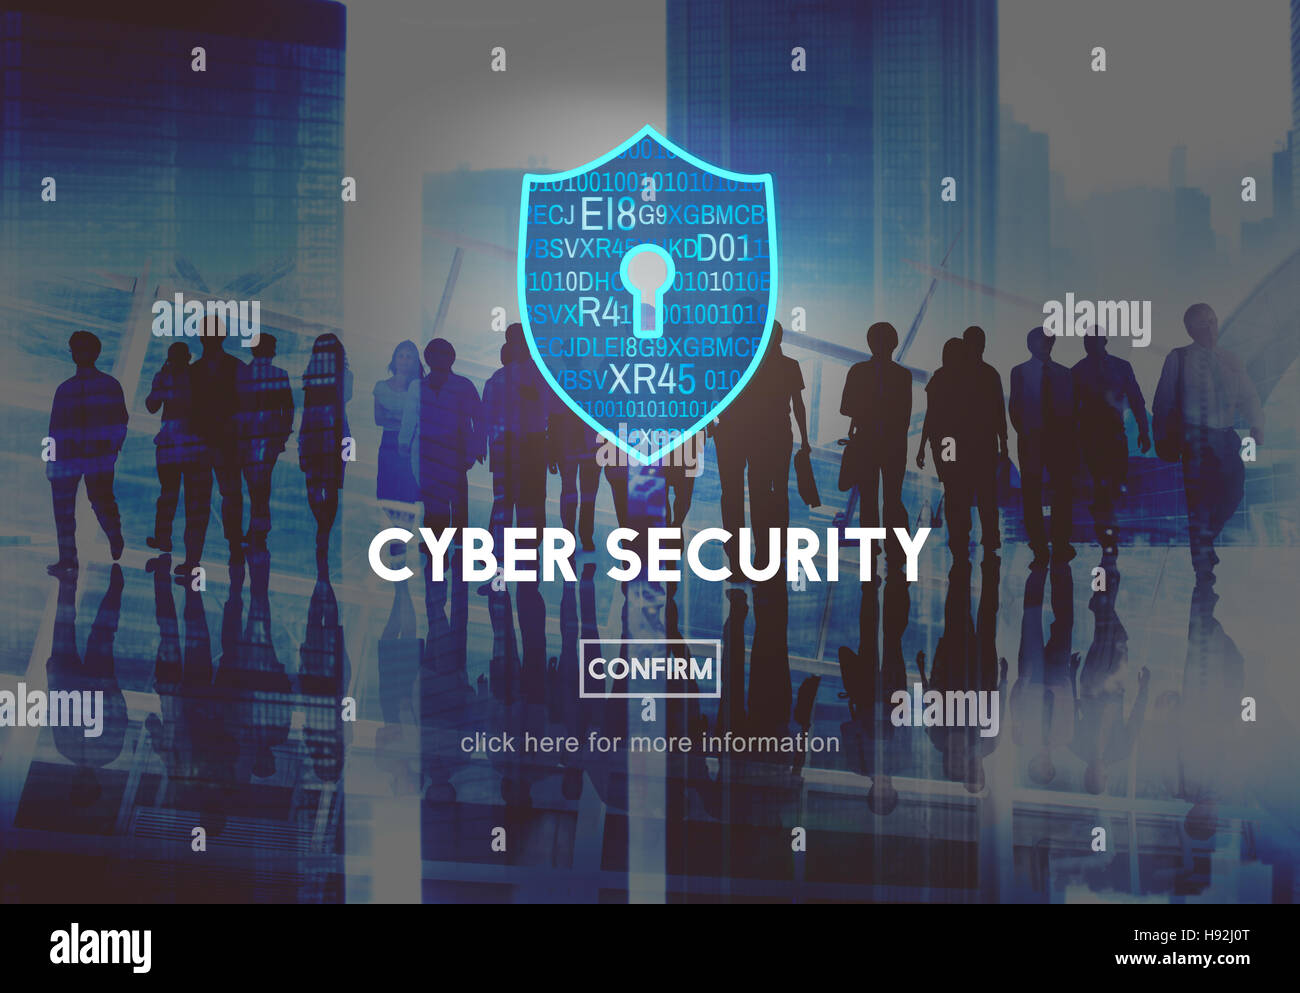 Cyber Security Online Protection Safe Concept Stock Photo